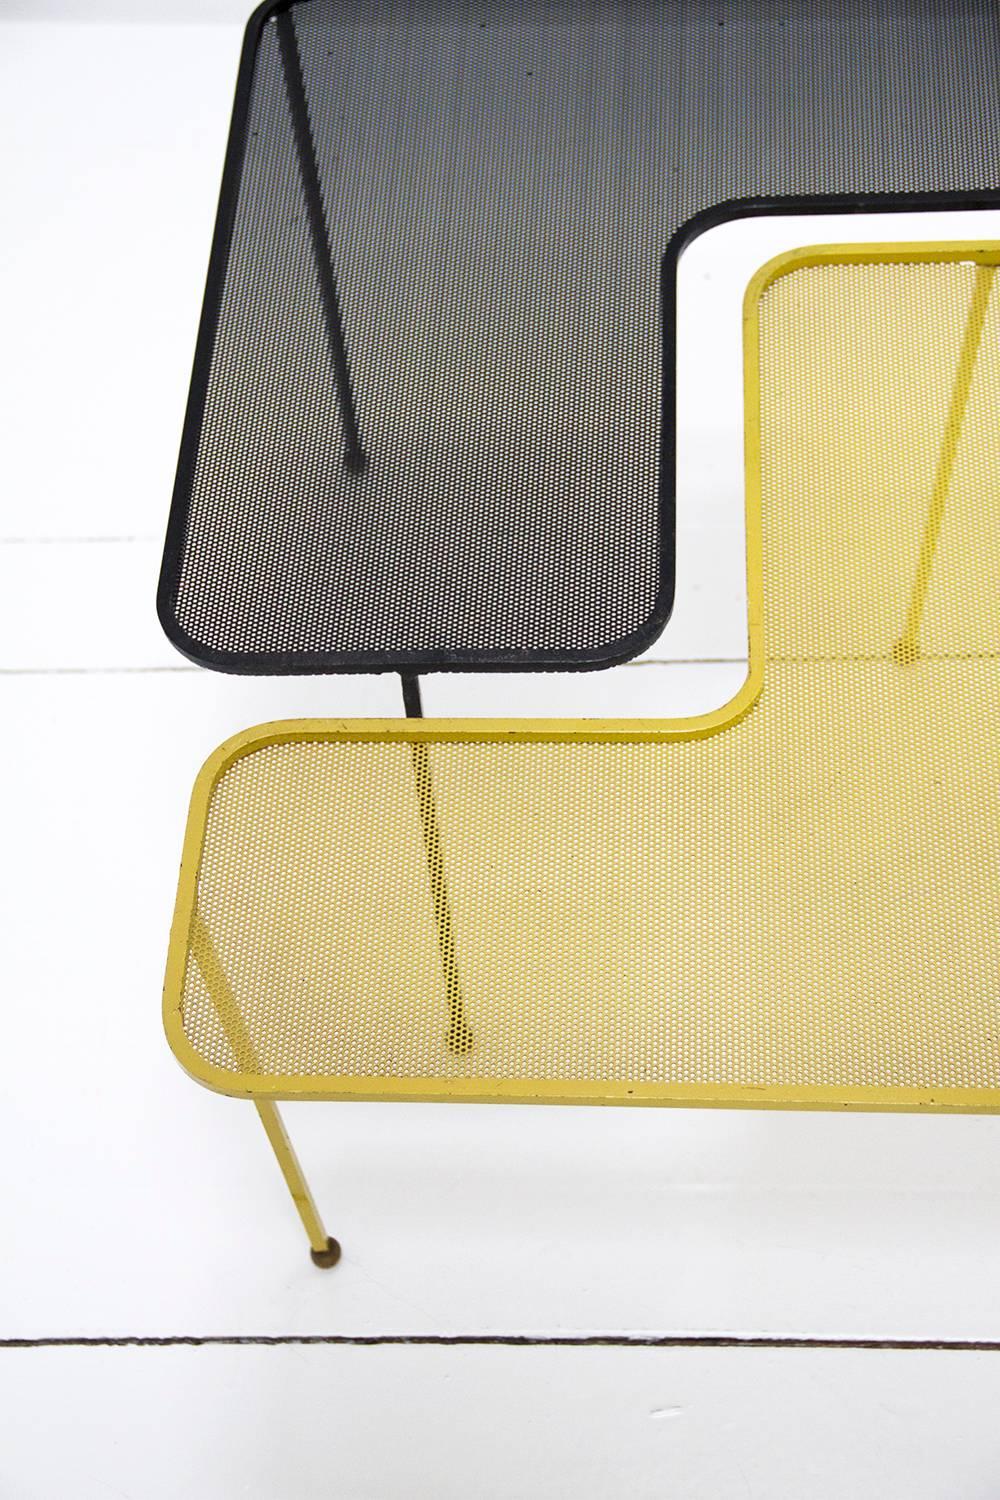 French Domino Table Designed by Mathieu Matégot Black and Yellow Metal, circa 1950 For Sale